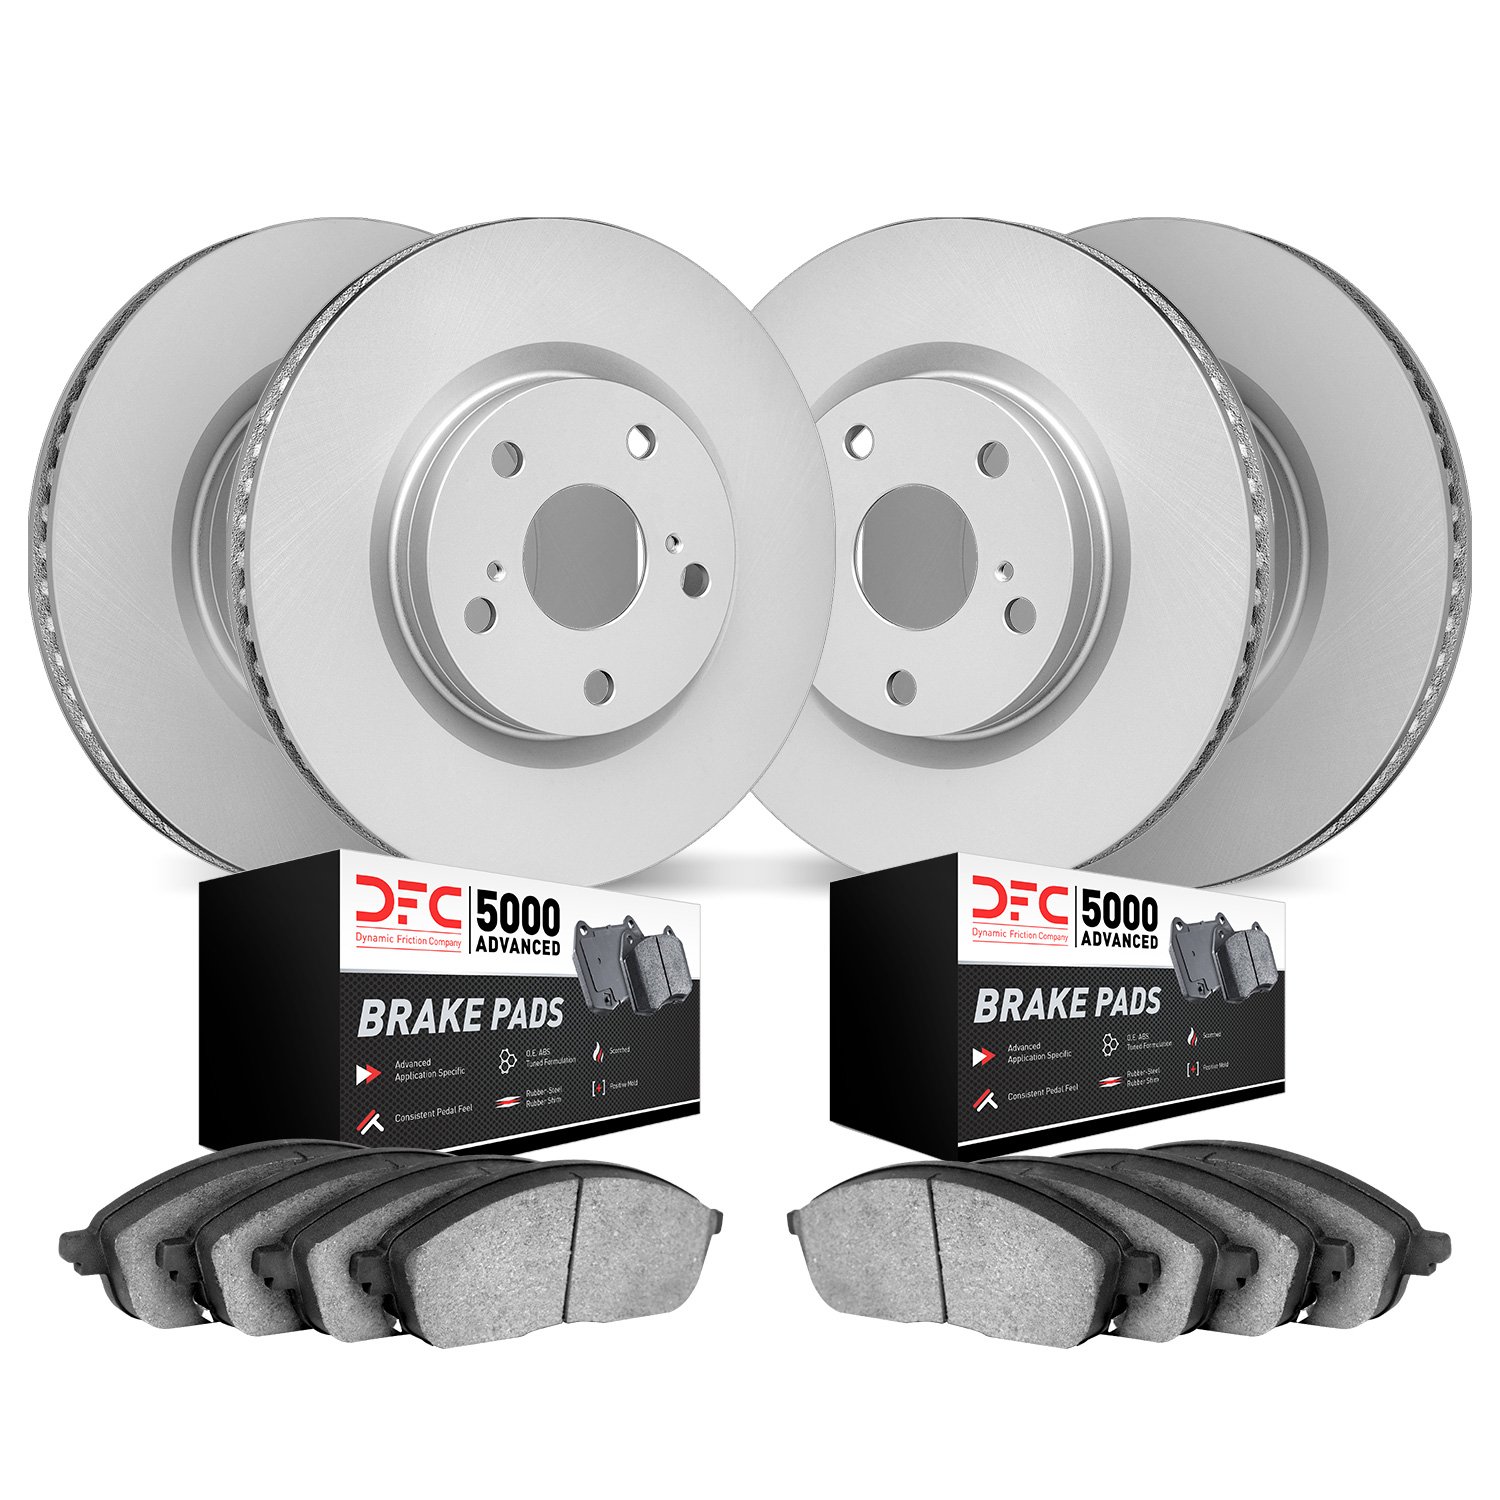 4504-31114 Geospec Brake Rotors w/5000 Advanced Brake Pads Kit, Fits Select BMW, Position: Front and Rear